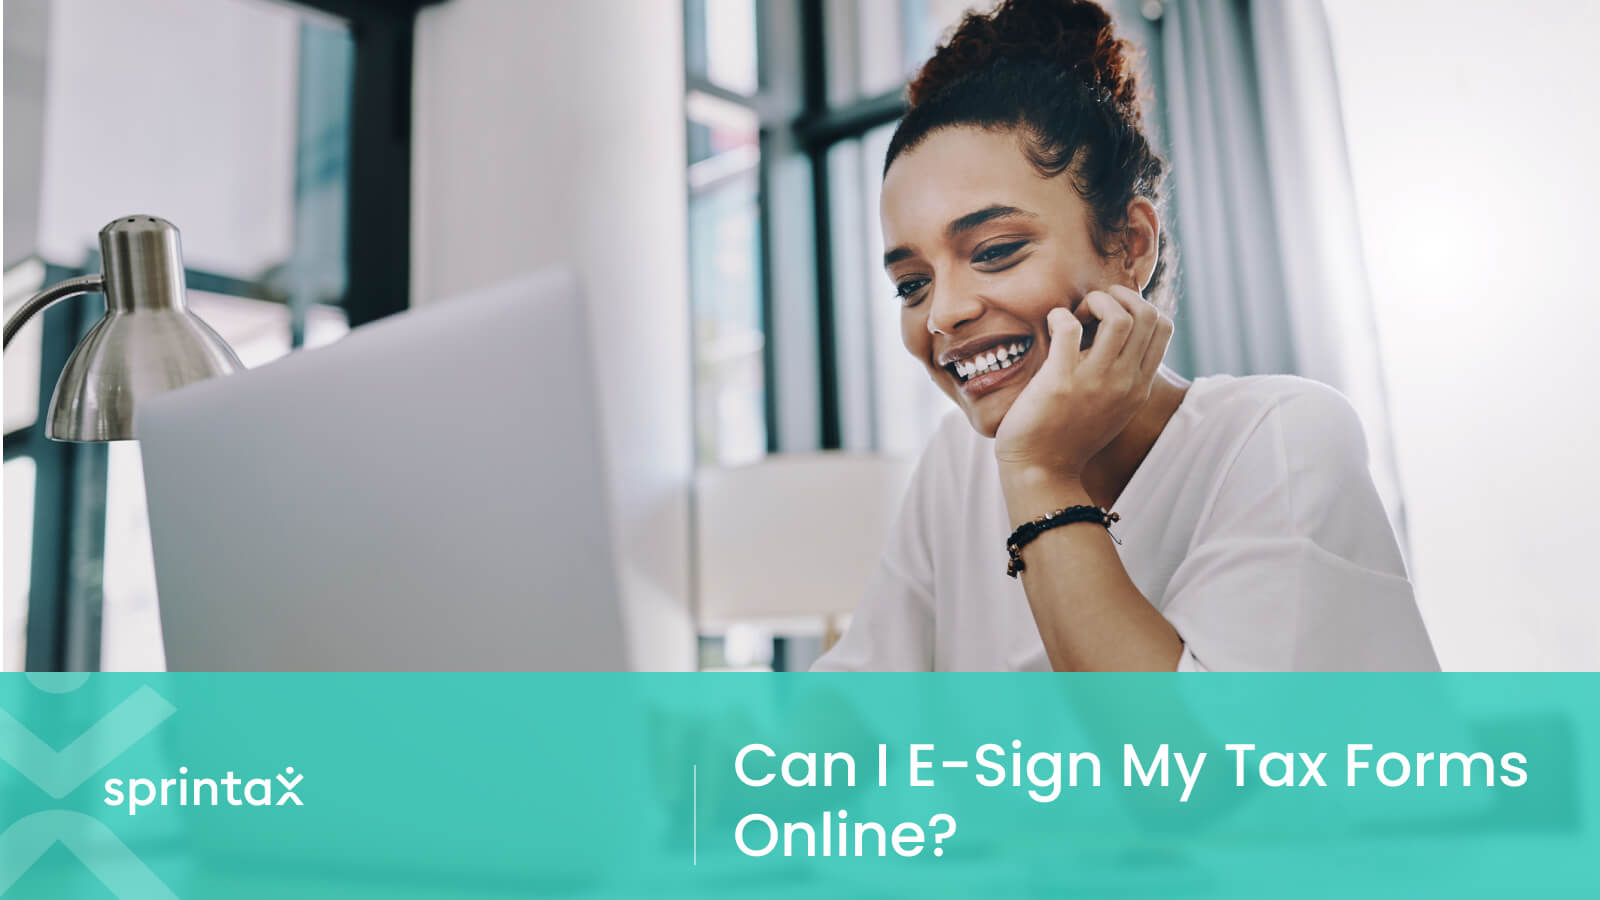 Apply an electronic signature